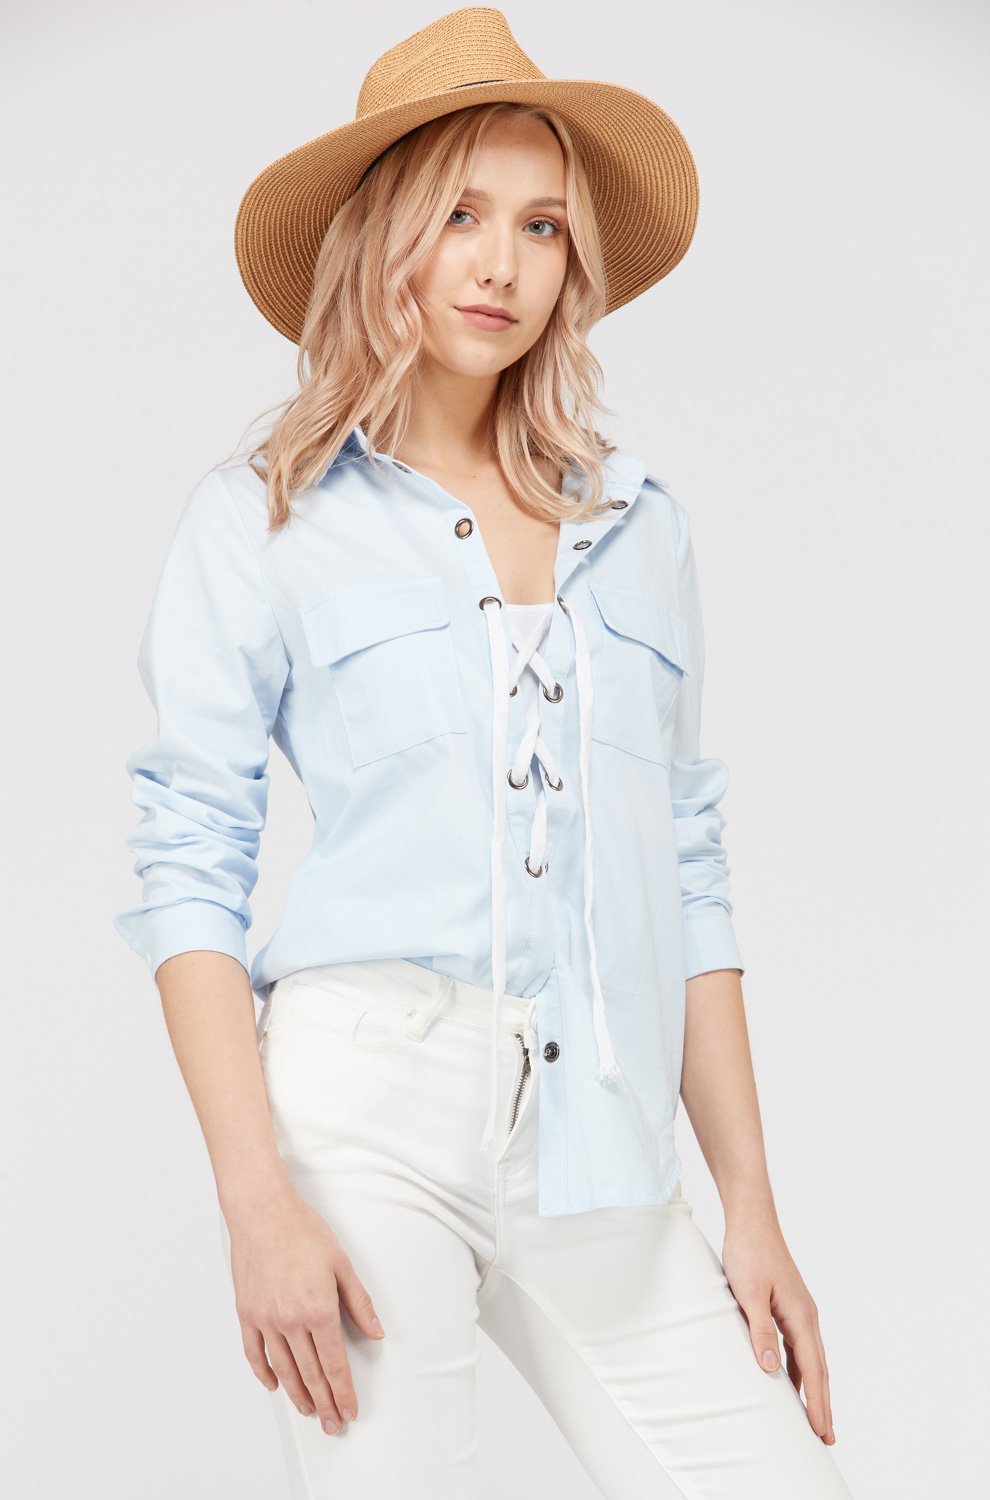 Women's Lace Up Blouse Top - Homreo